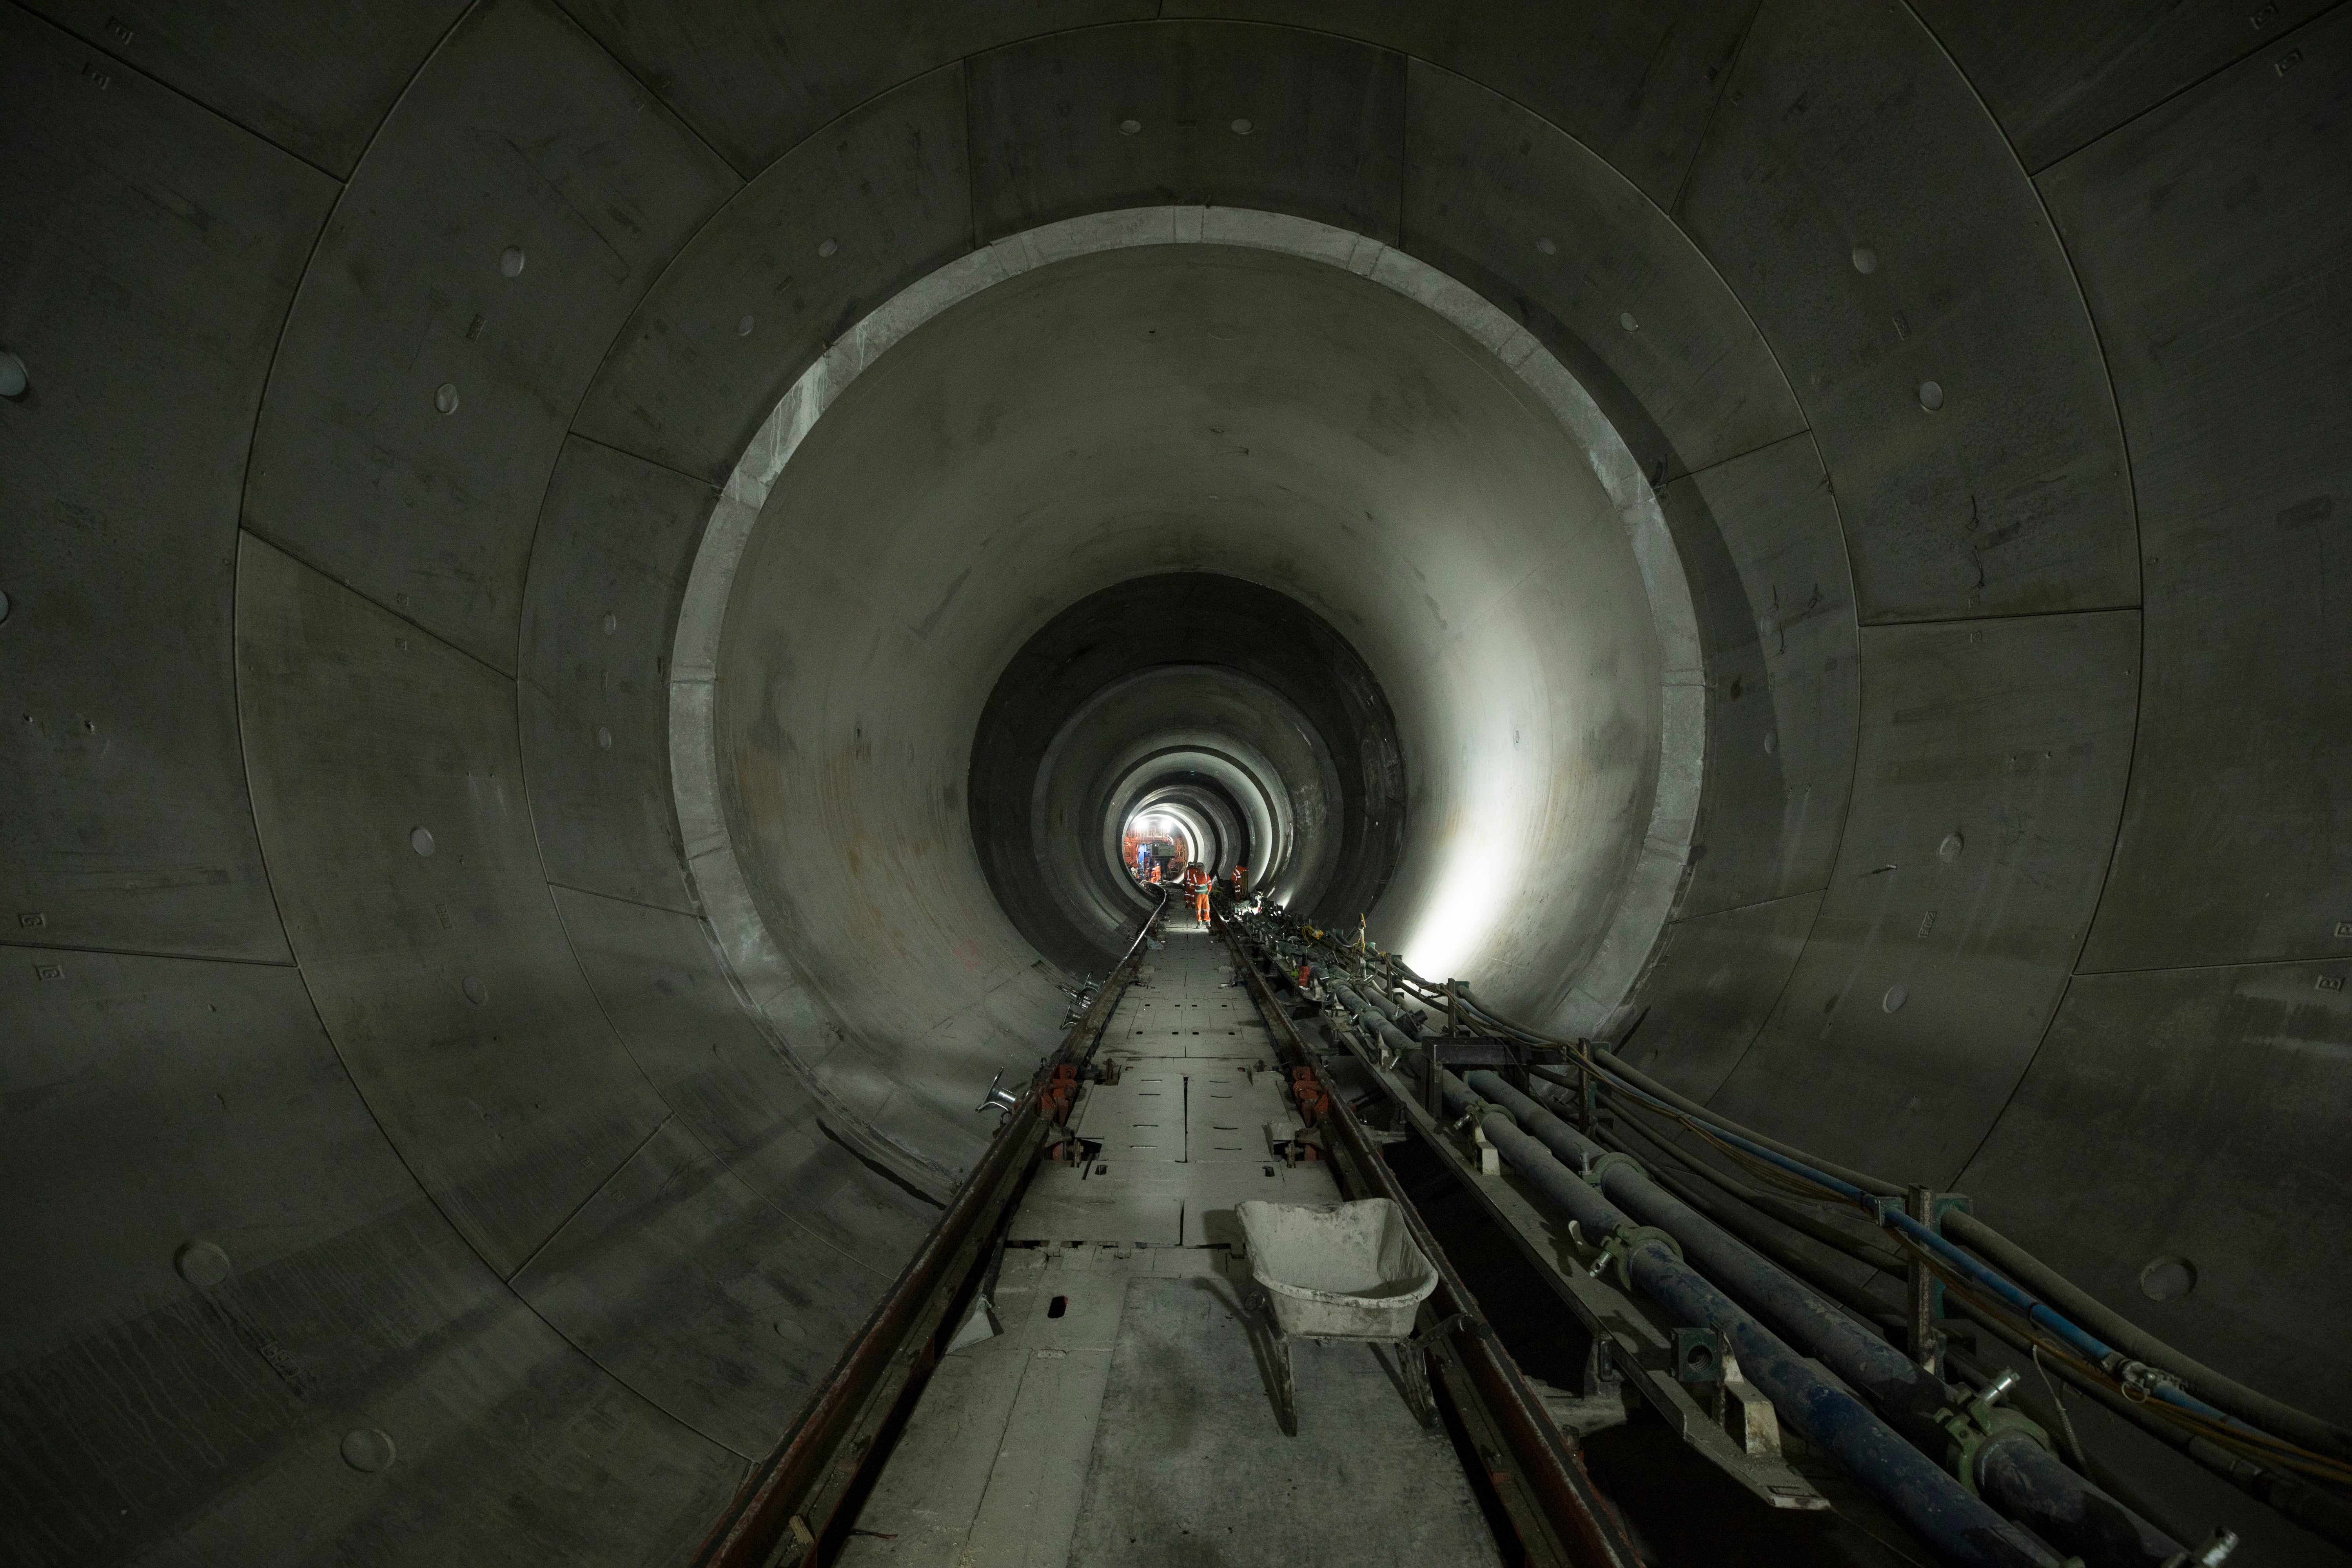 Construction of London’s ?5 million super sewer has finally been completed after eight years of work